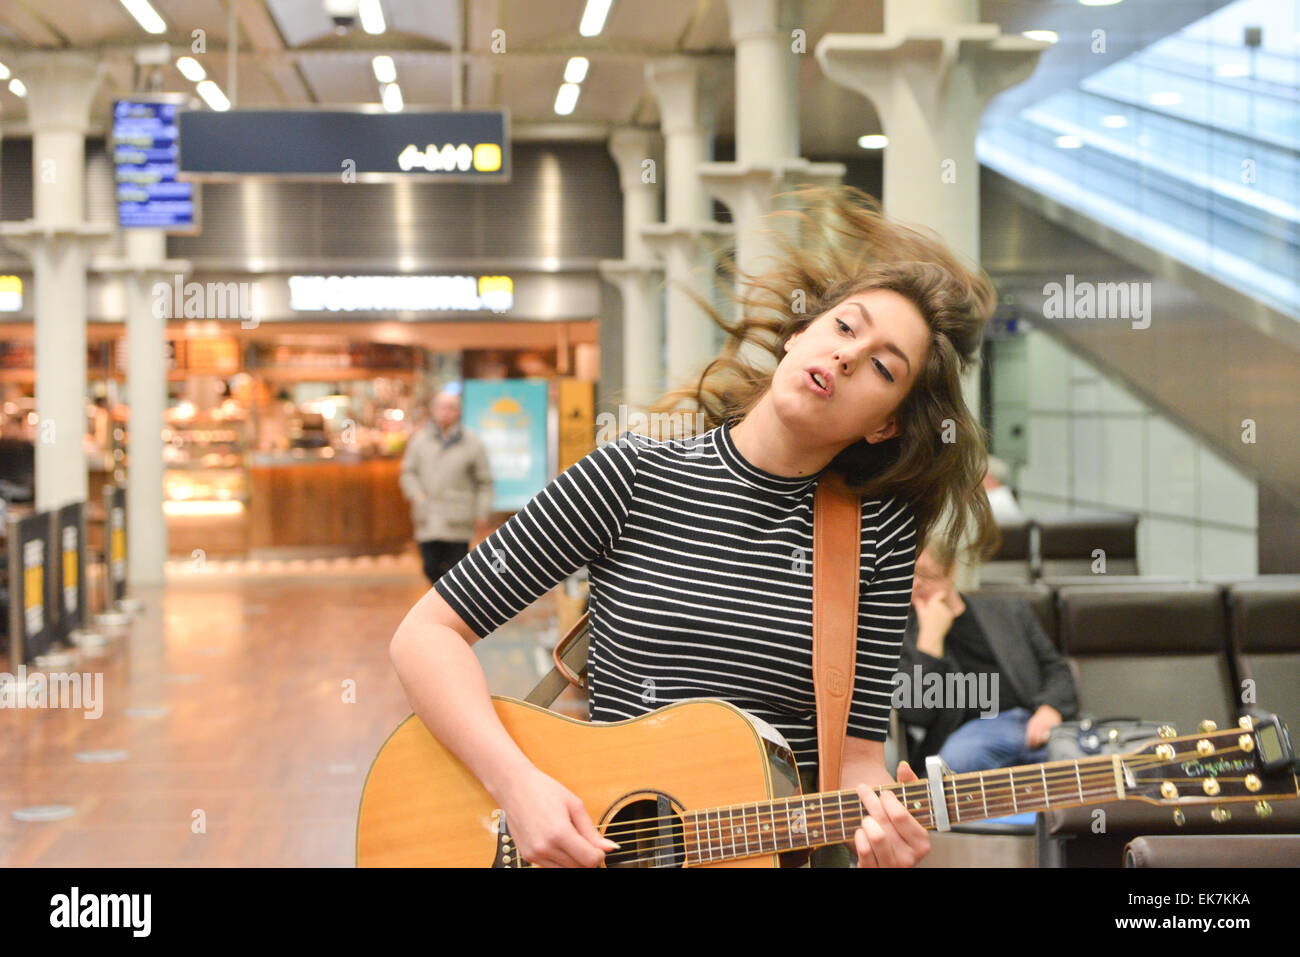 St Pancras International, London, UK. 8th April 2015. Enfield 16 yr old Natalie Shay a student at the BRIT school boards the Eurostar to busk in Paris for the day. She was awarded the Eurostar prize as well as the Youth Category in last years Gigs Busking competition organised by City Hall. Credit:  Matthew Chattle/Alamy Live News Stock Photo